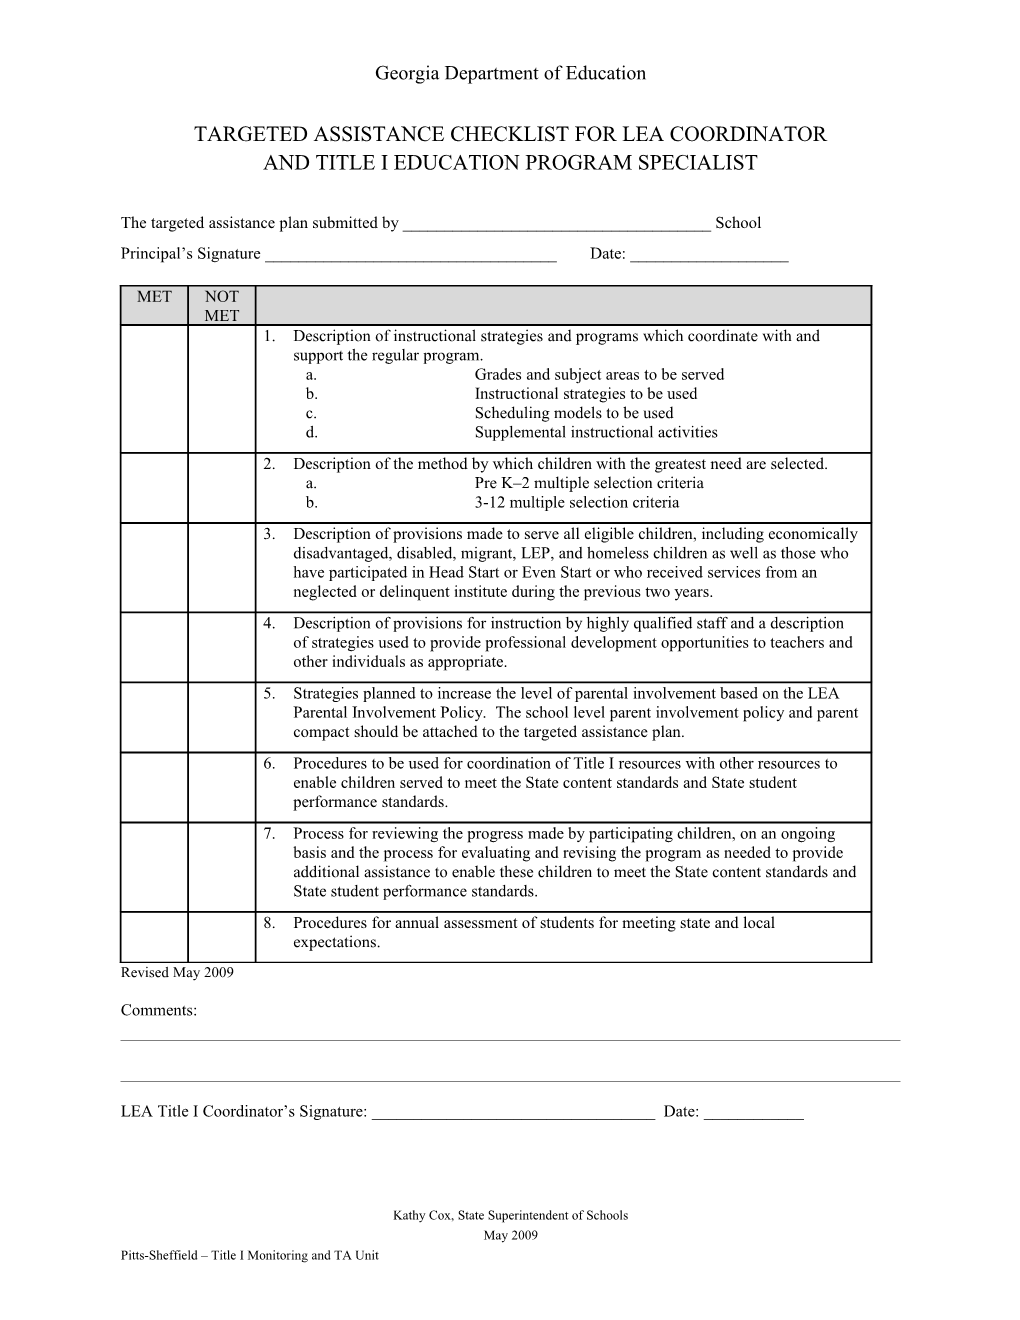 Targeted Assistance Checklist for LEA Coordinator